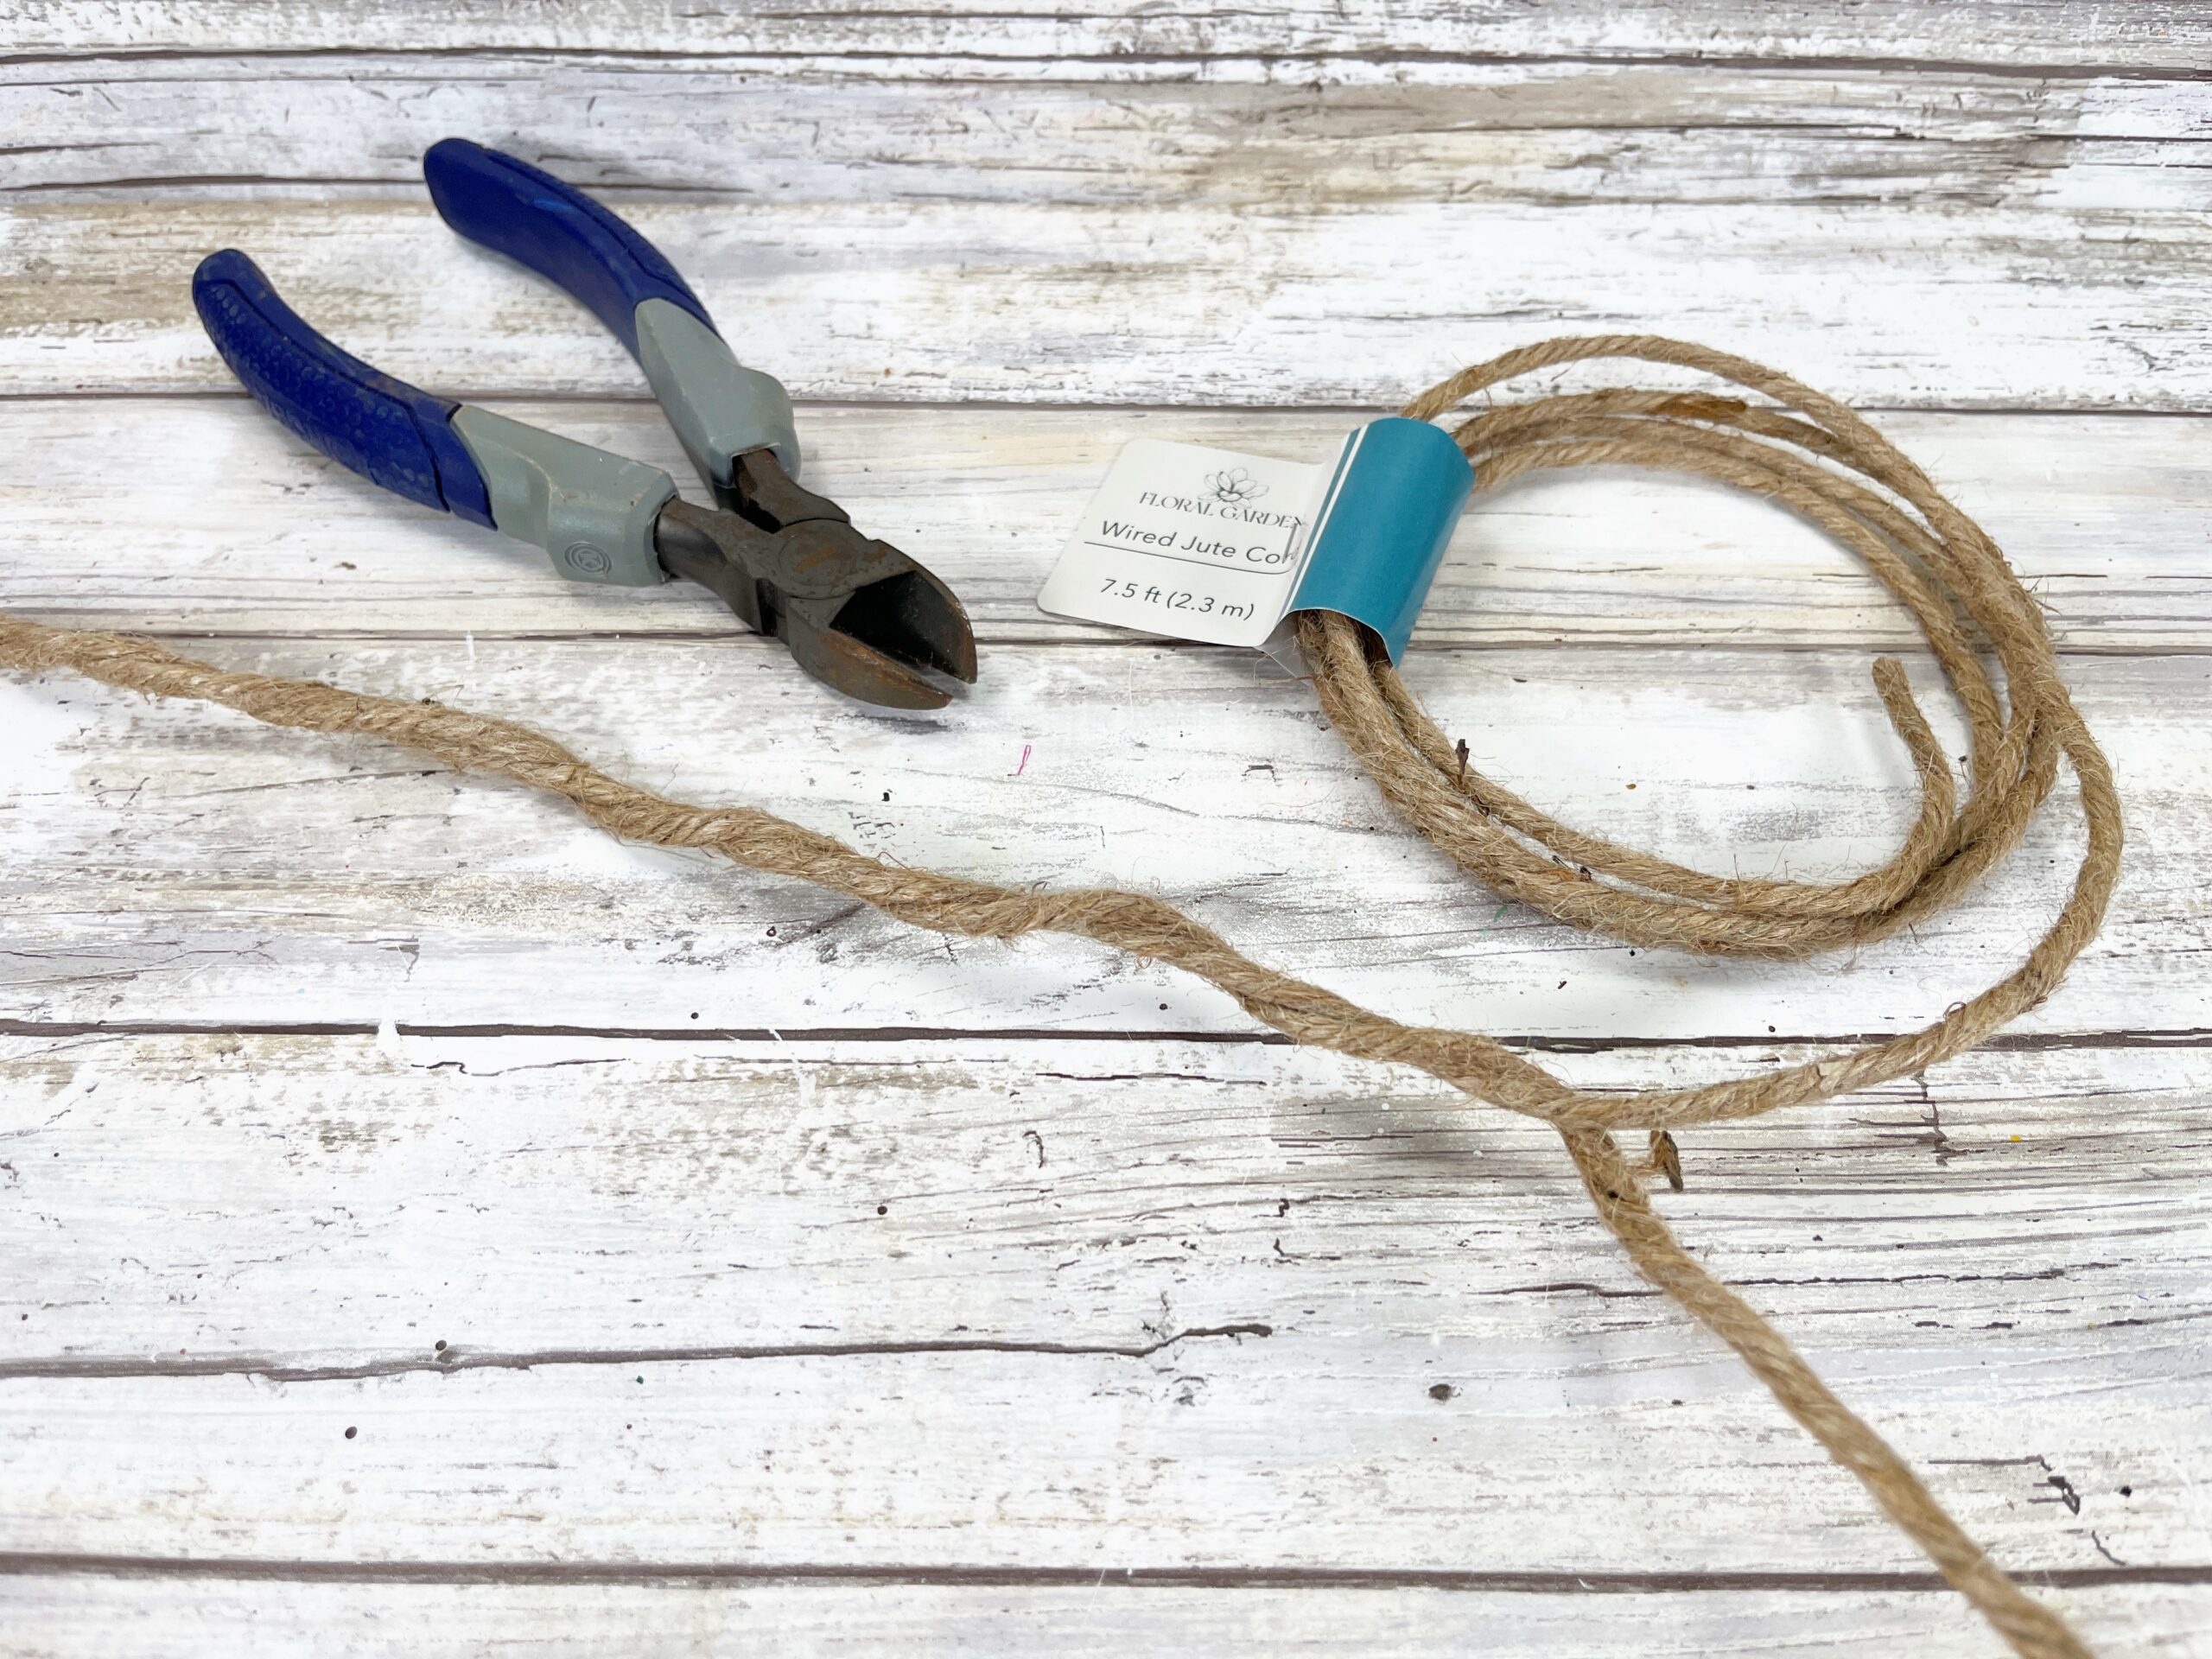 Wired jute cord and wire cutters sitting on a whitewashed table.